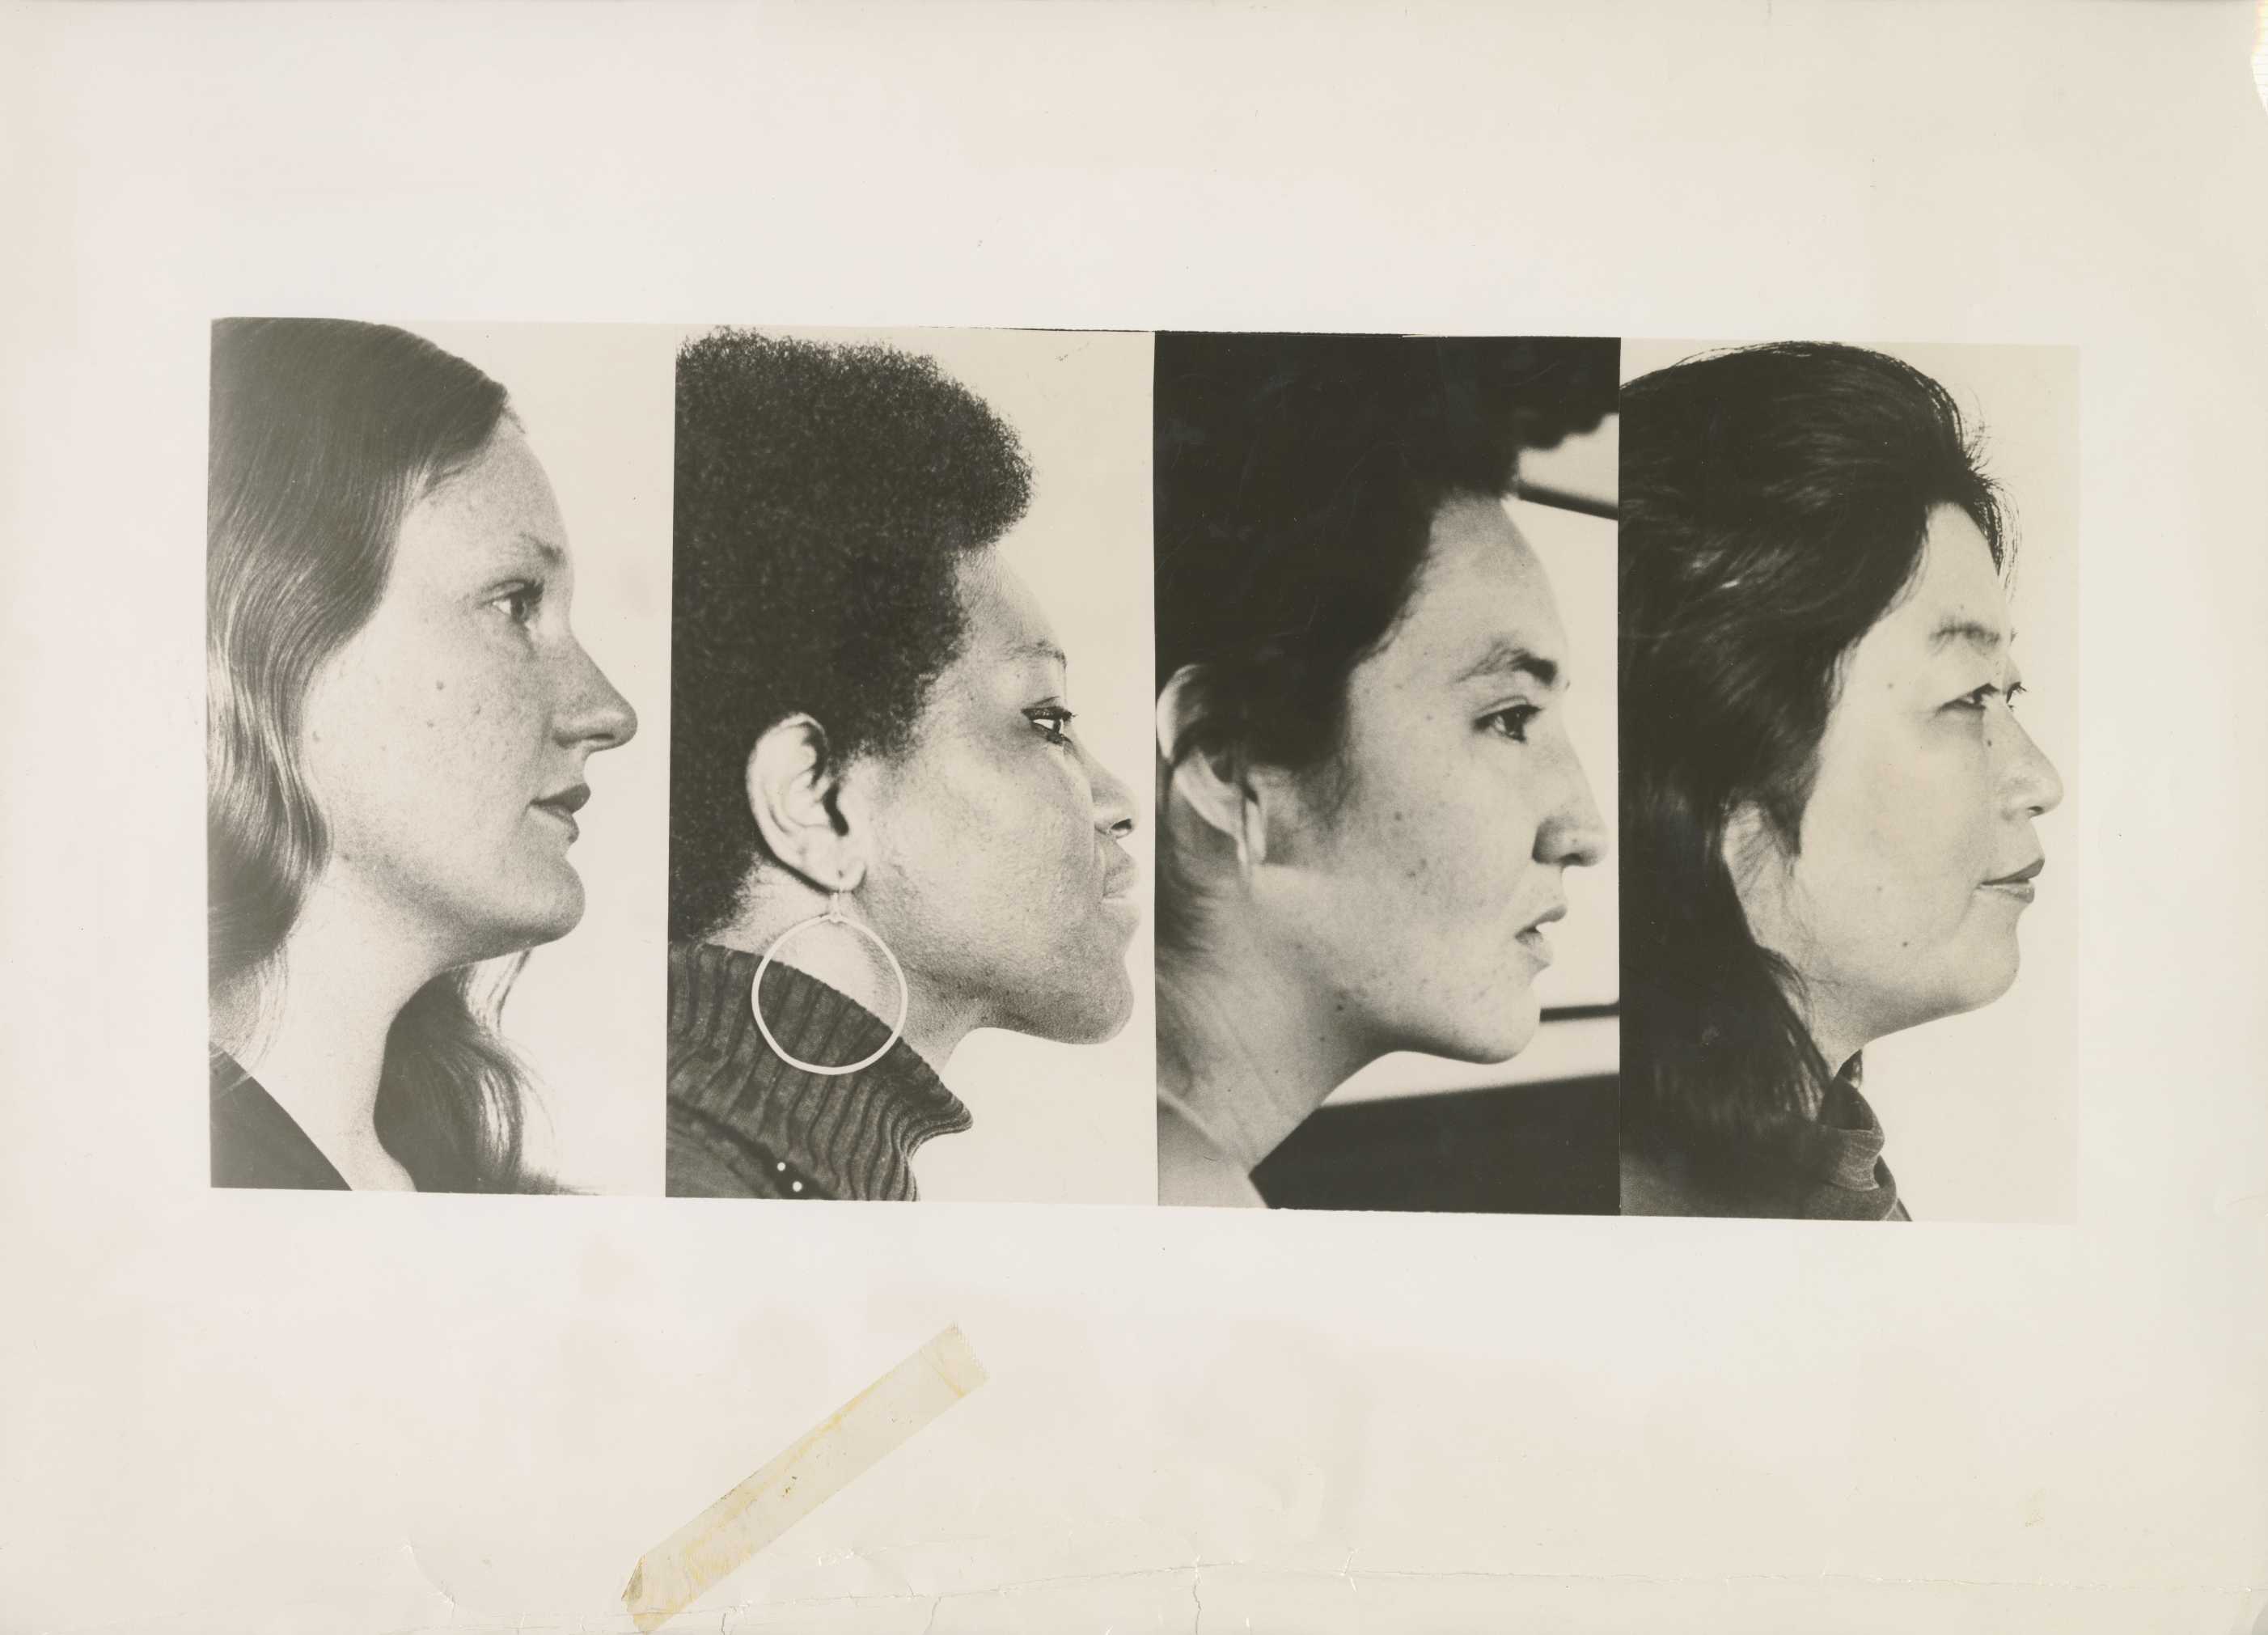 Black-and-white profile-side headshots of each of the artists in order from left to right: Cecilia Sandoval, Mary Lucier, Shigeko Kubota, and Charlotte Warren, on a beige background.